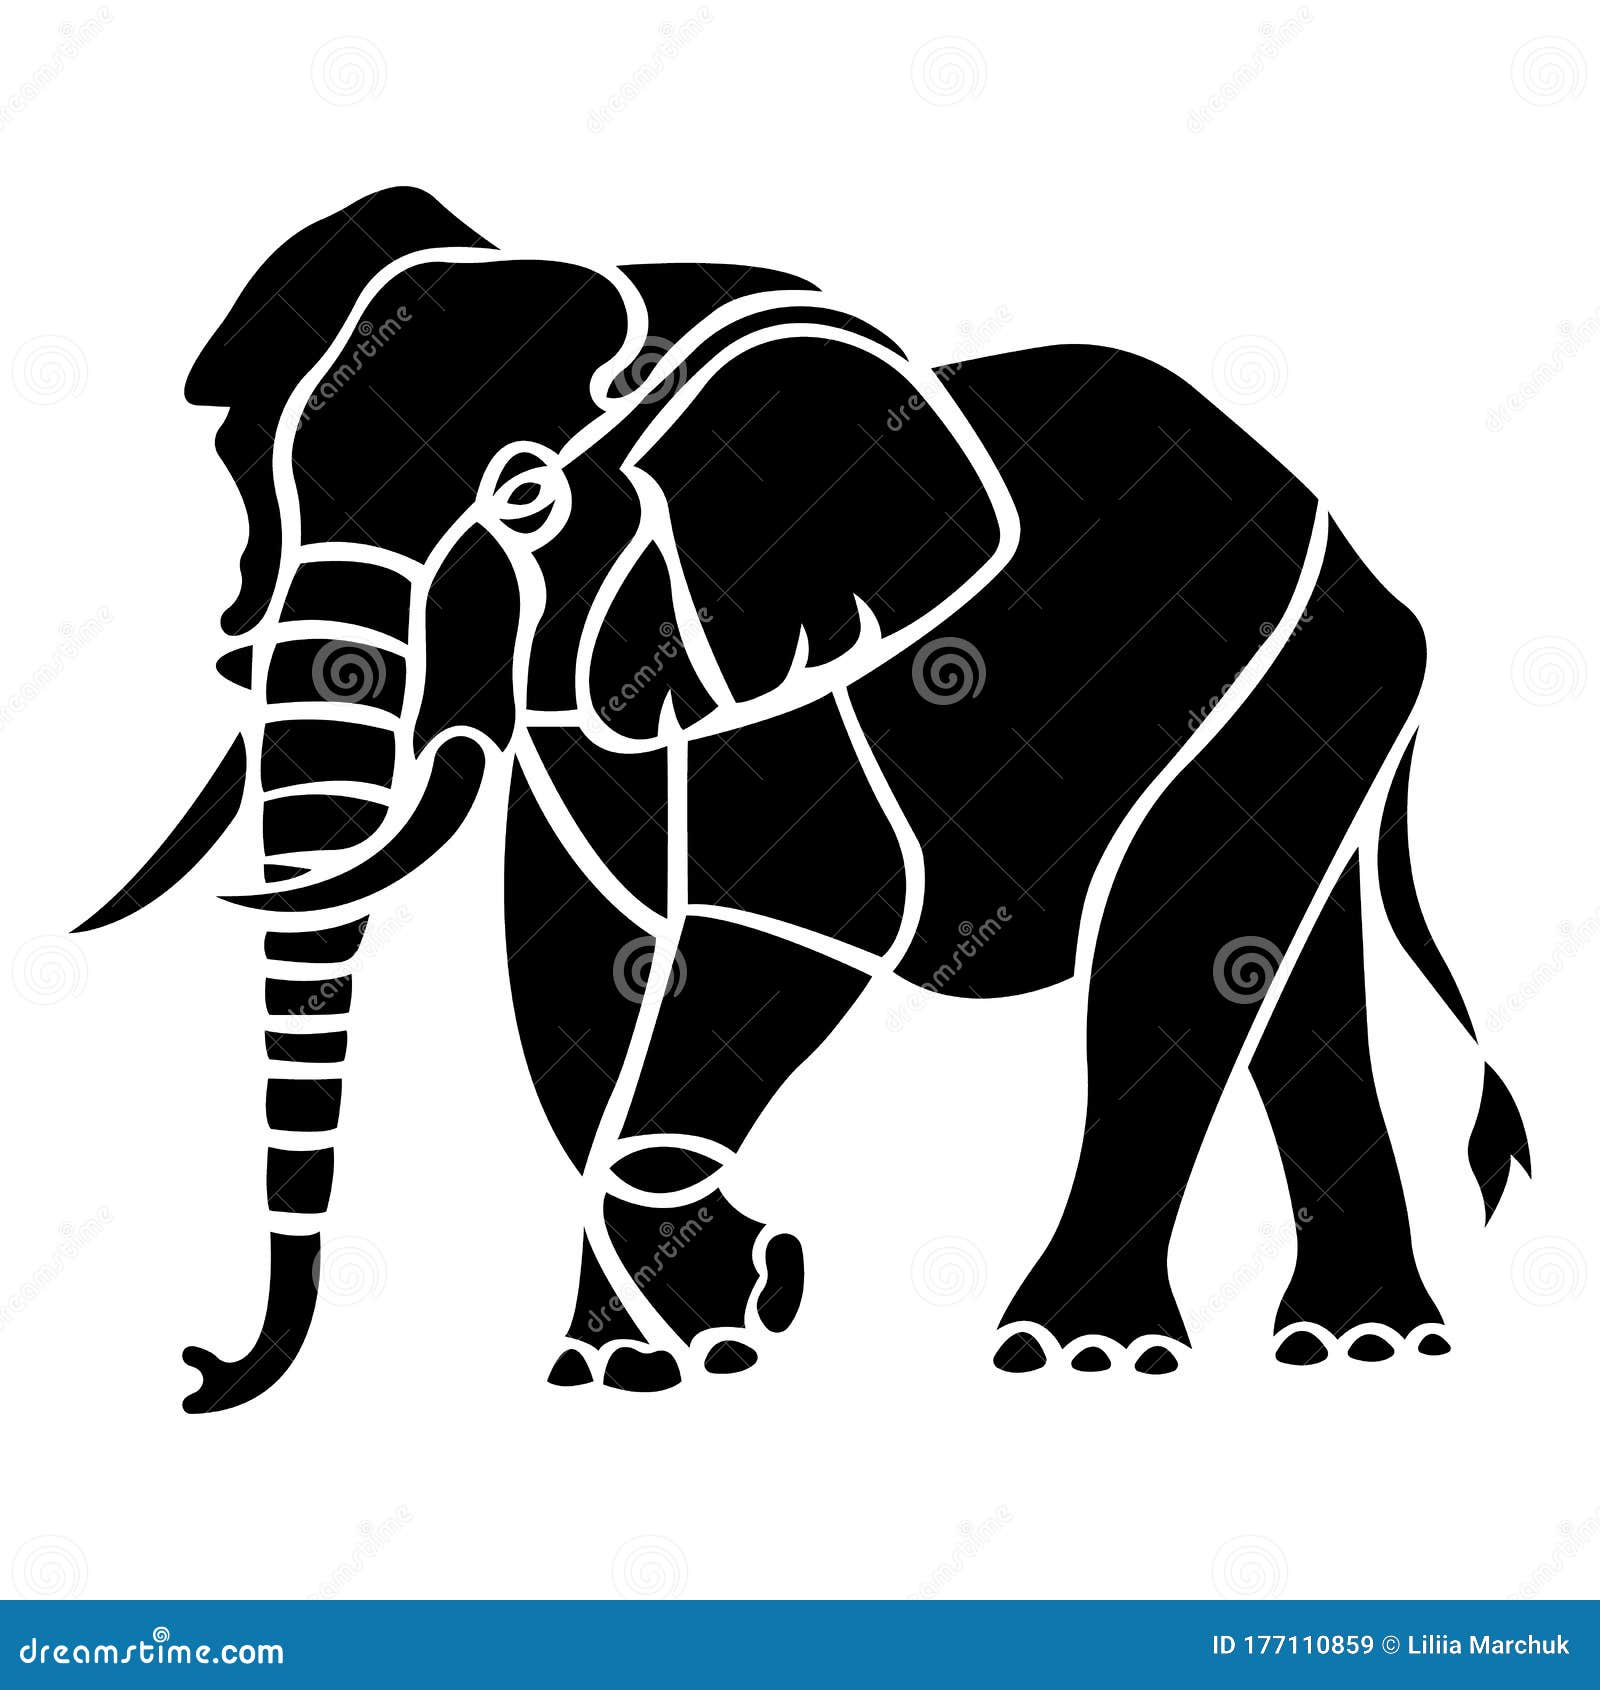 Elephant is a Silhouette of Black Color Drawn by Various Lines in a Flat  Style. Tattoo, Animal Logo, Fashion Design, Emblem Stock Vector -  Illustration of label, decorative: 177110859